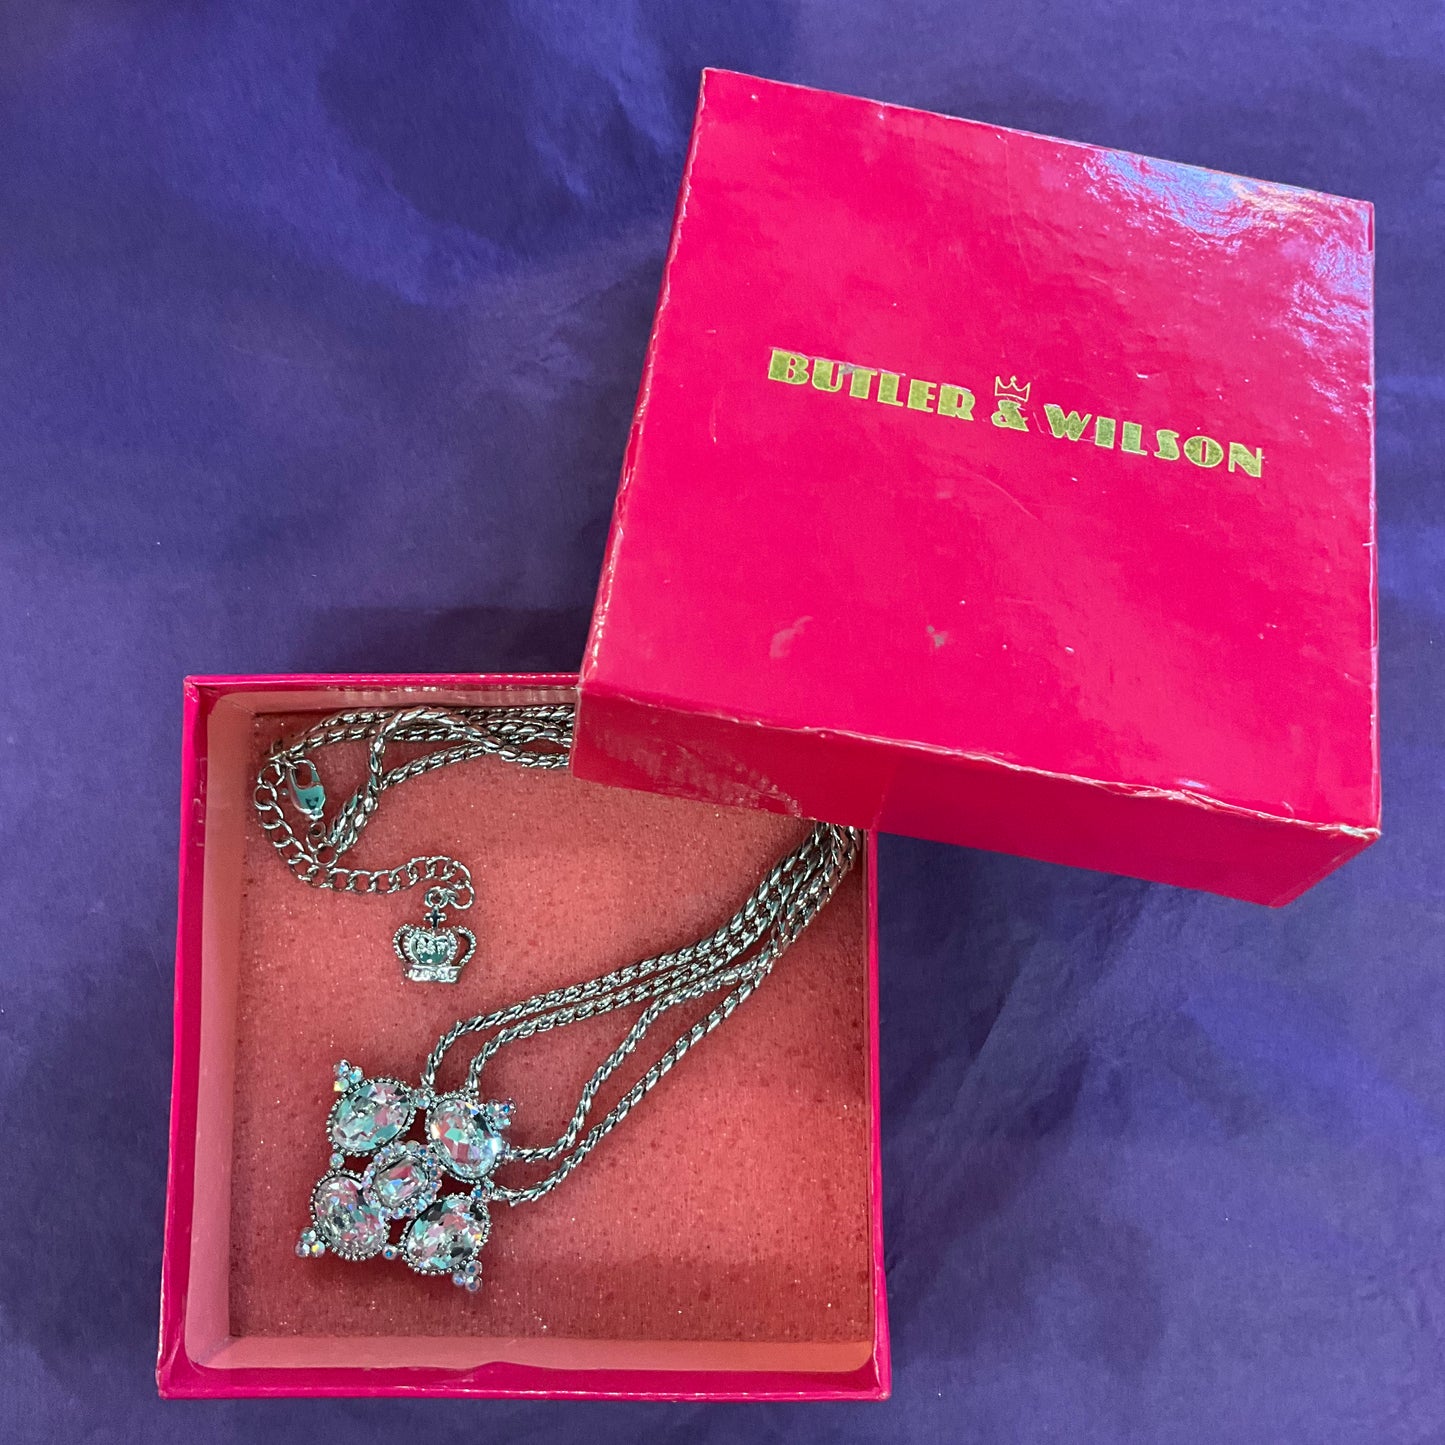 Vintage Butler and Wilson Large silver crystal statement pendant, double metal chain, as new in original box.